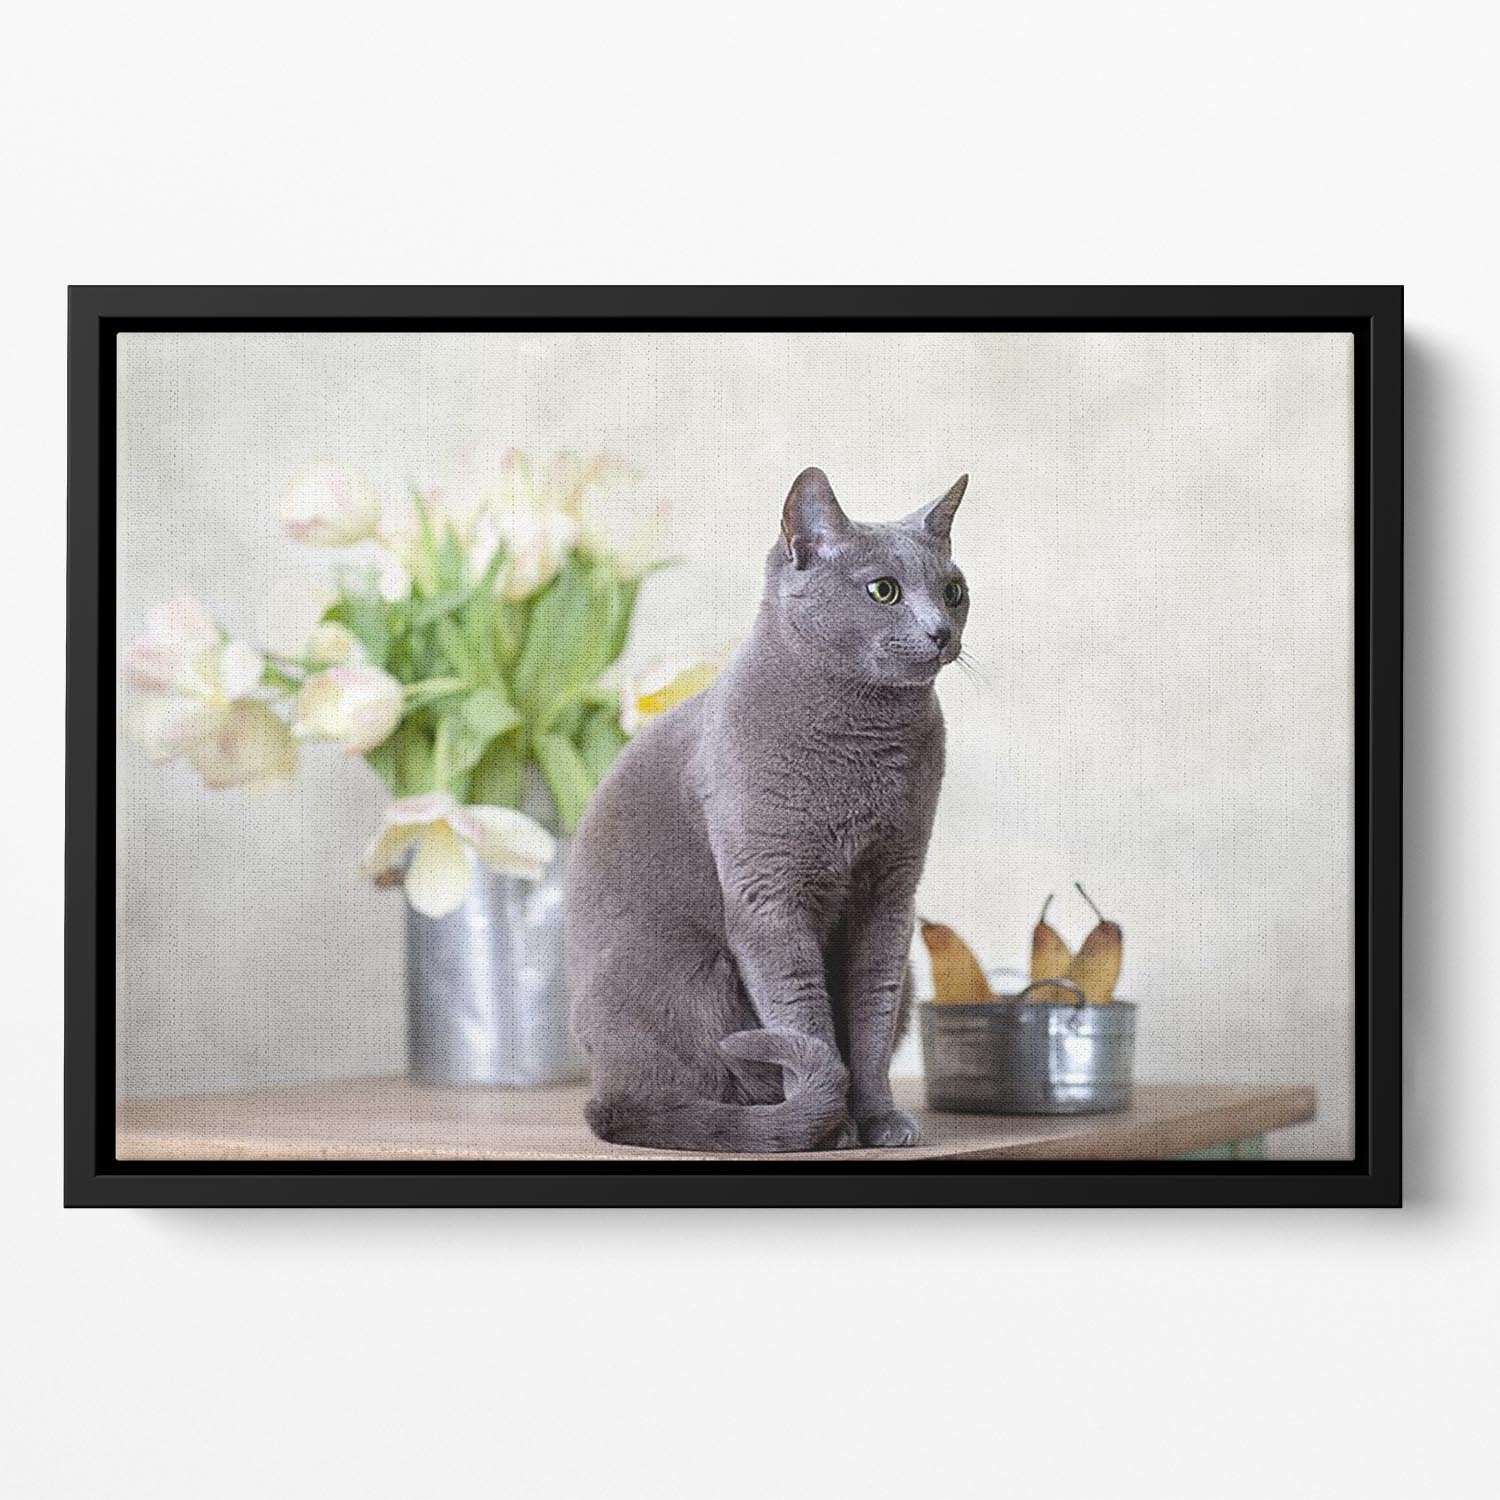 Russian Blue cat sitting on table with pears and tulips Floating Framed Canvas - Canvas Art Rocks - 2